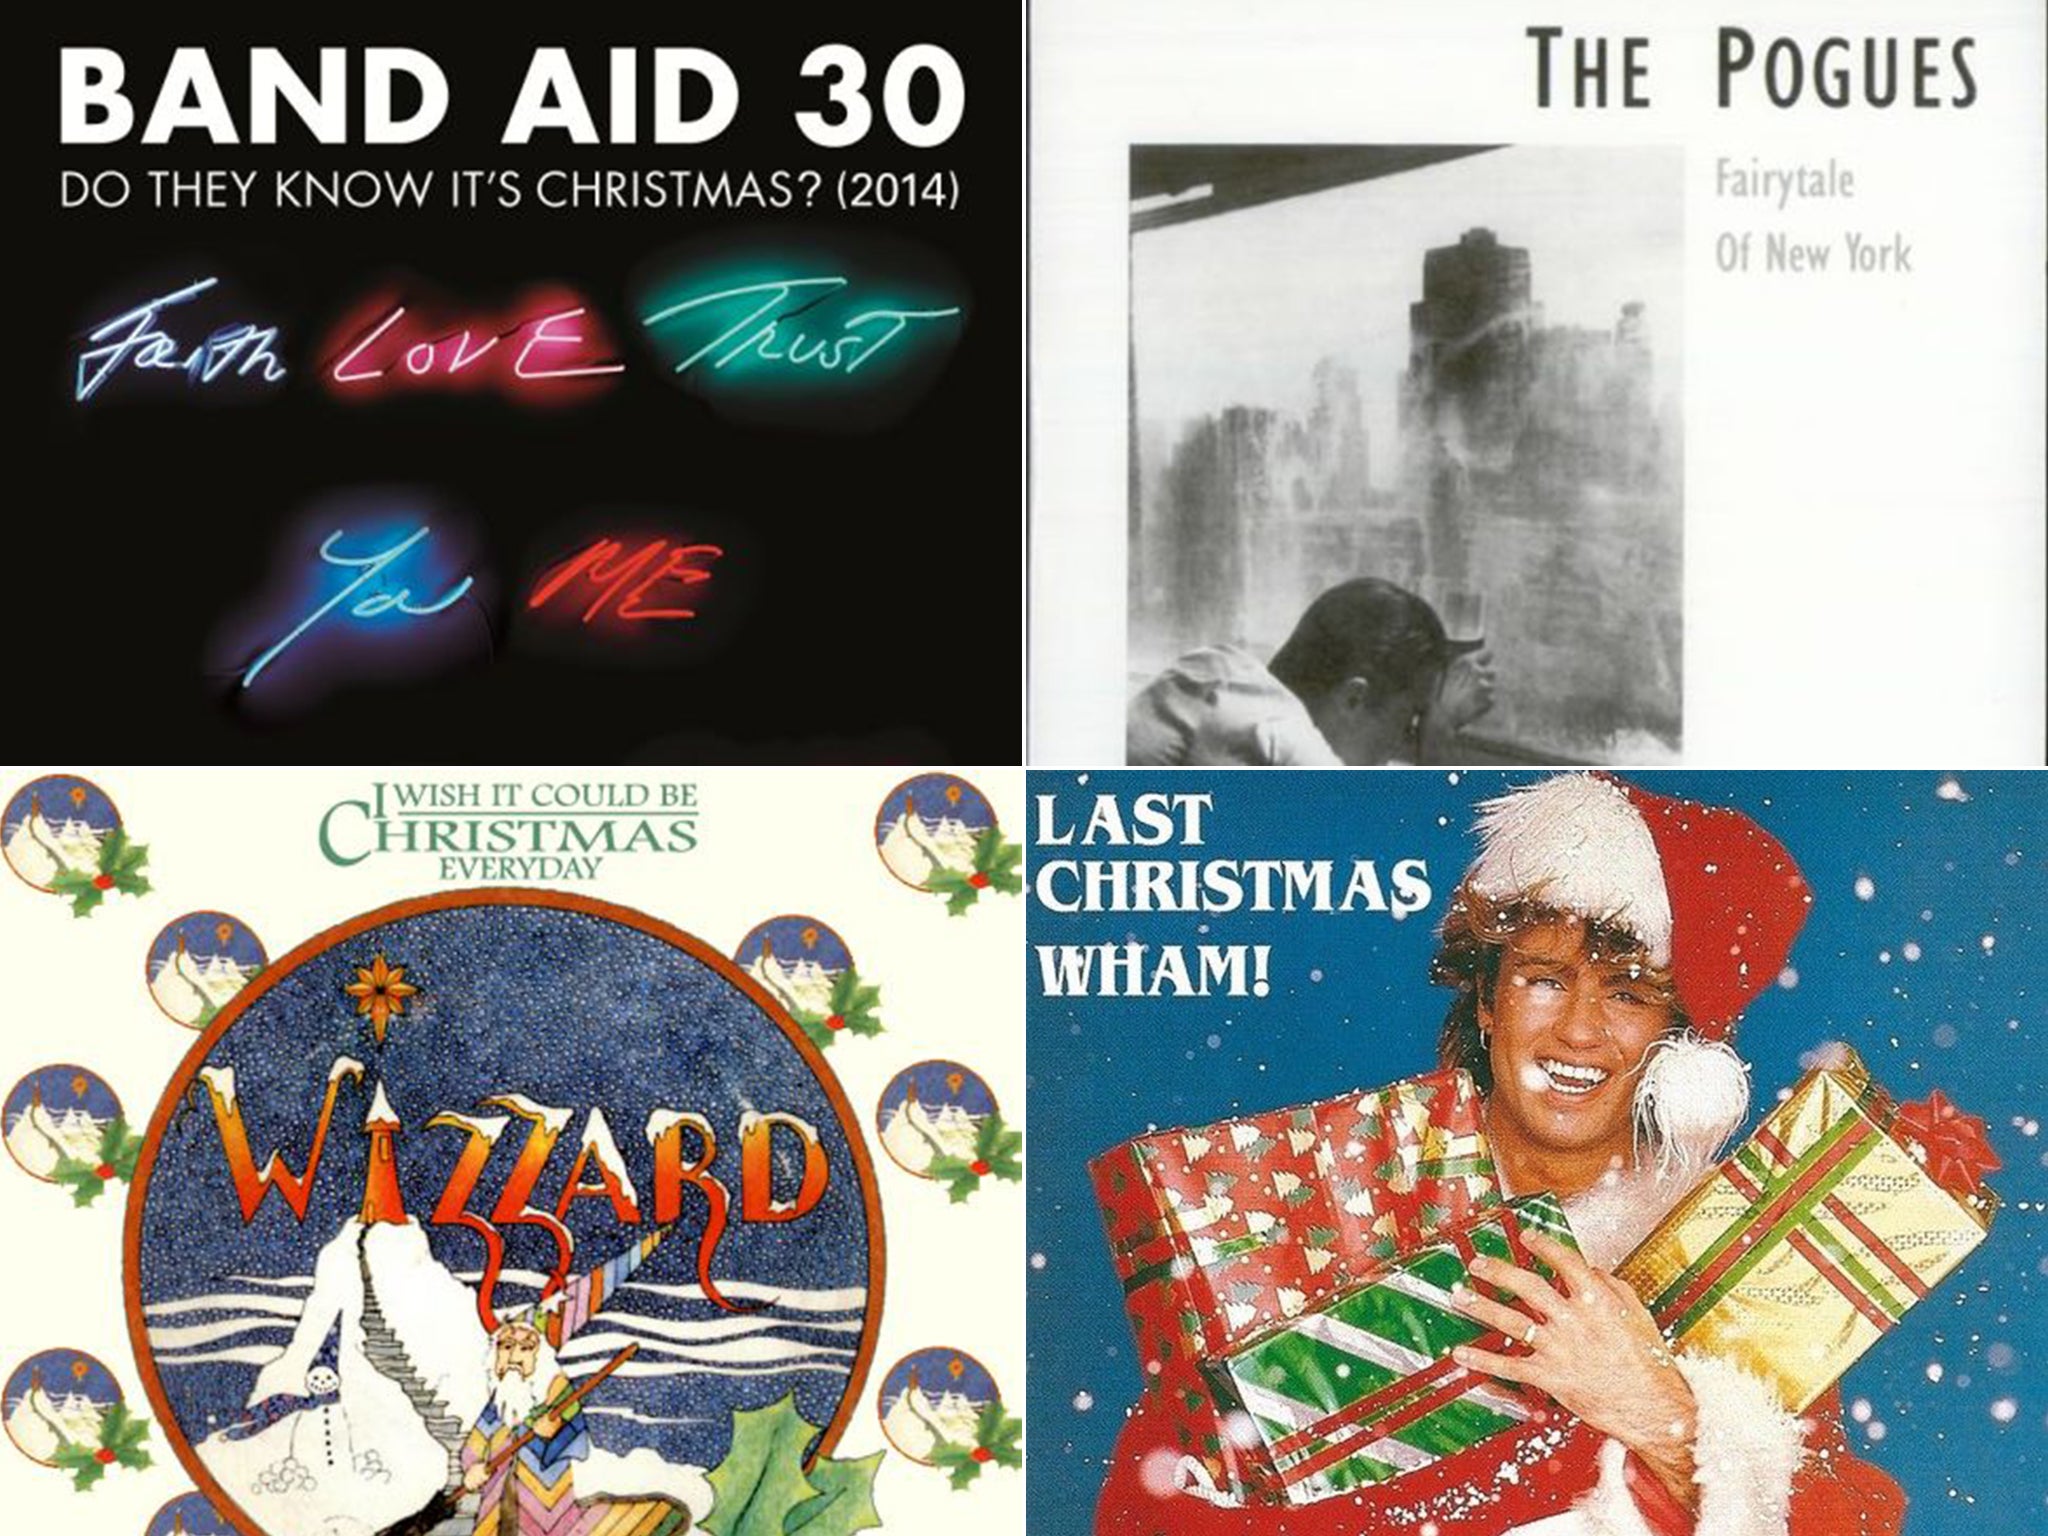 Some of the records in contention for the coveted Christmas No 1 spot